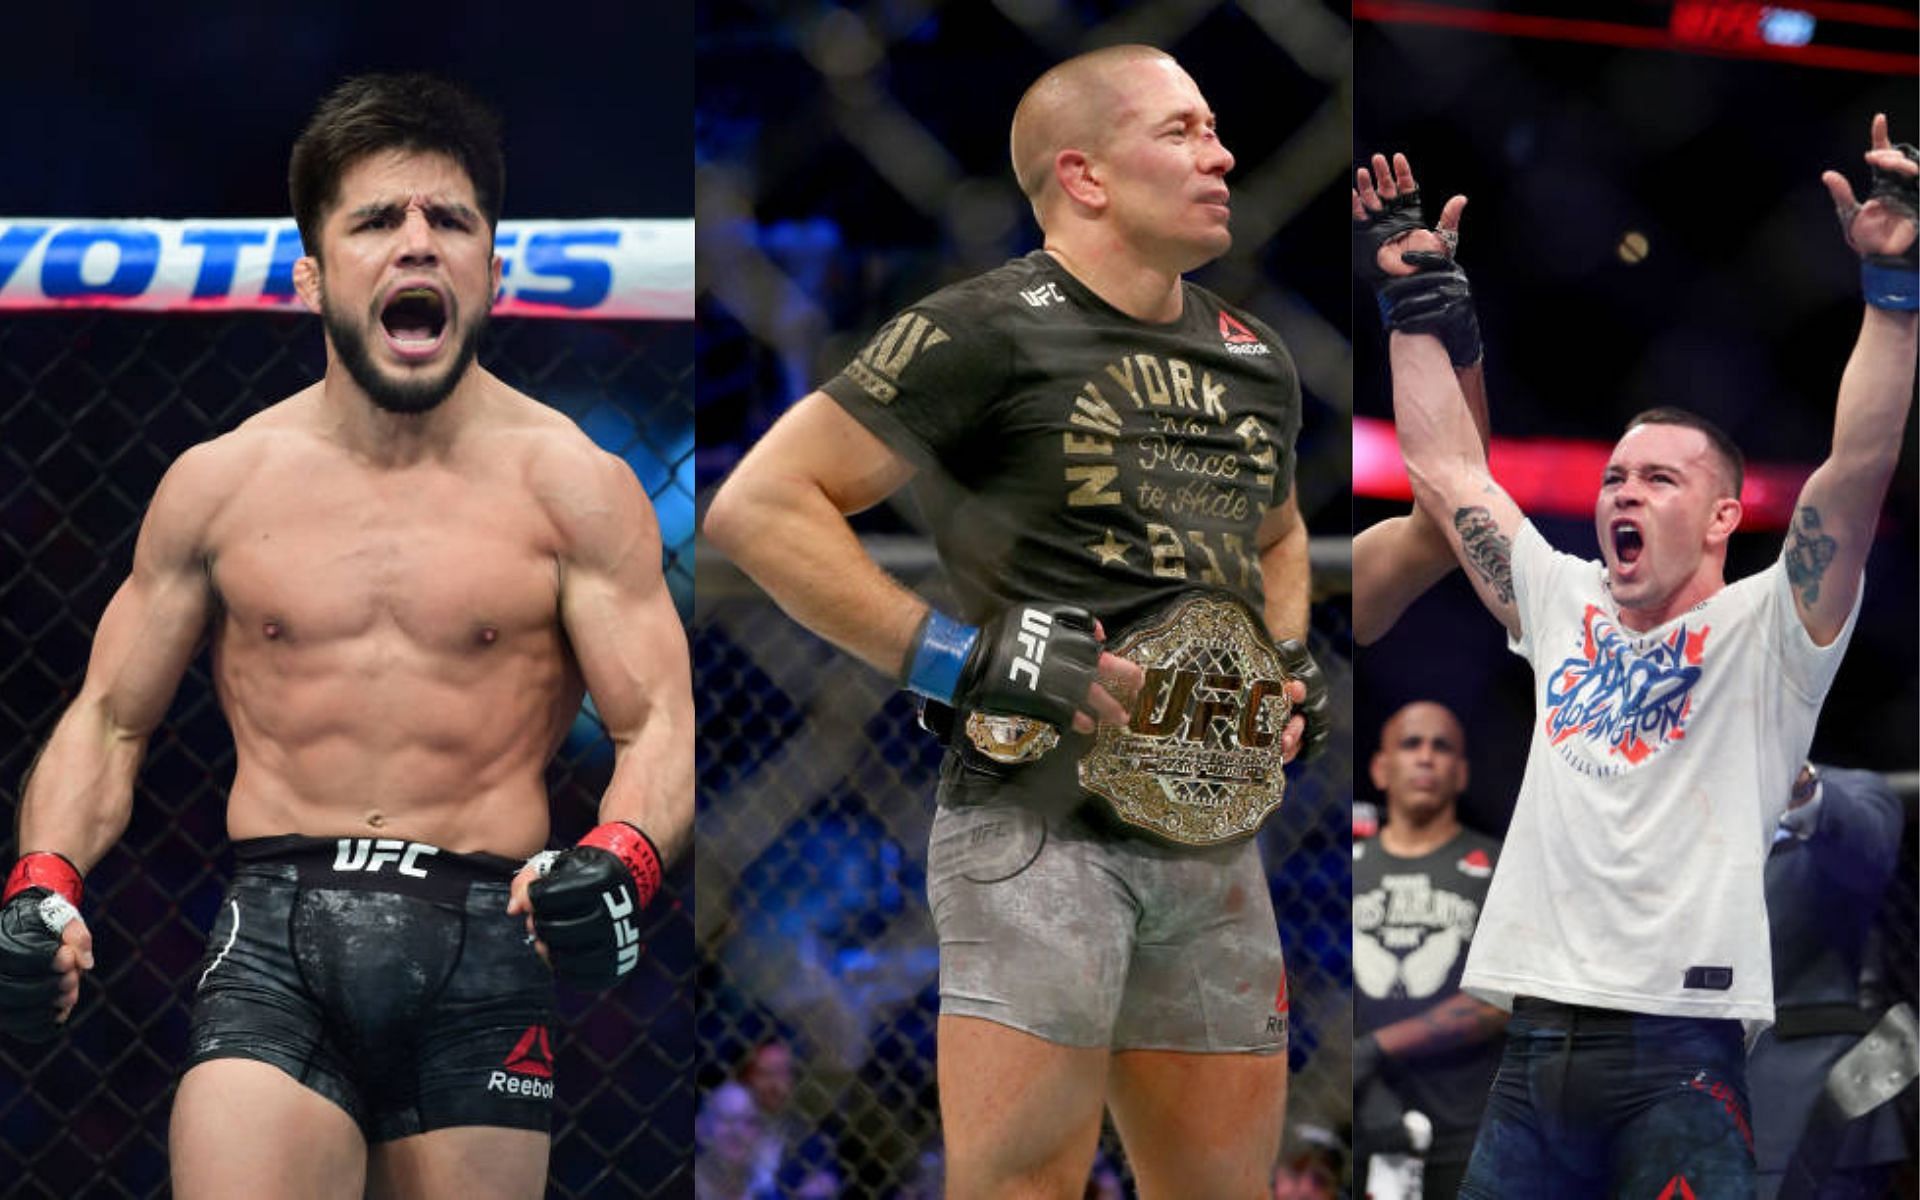 From left to right: Henry Cejudo, Georges St-Pierre, Colby Covington